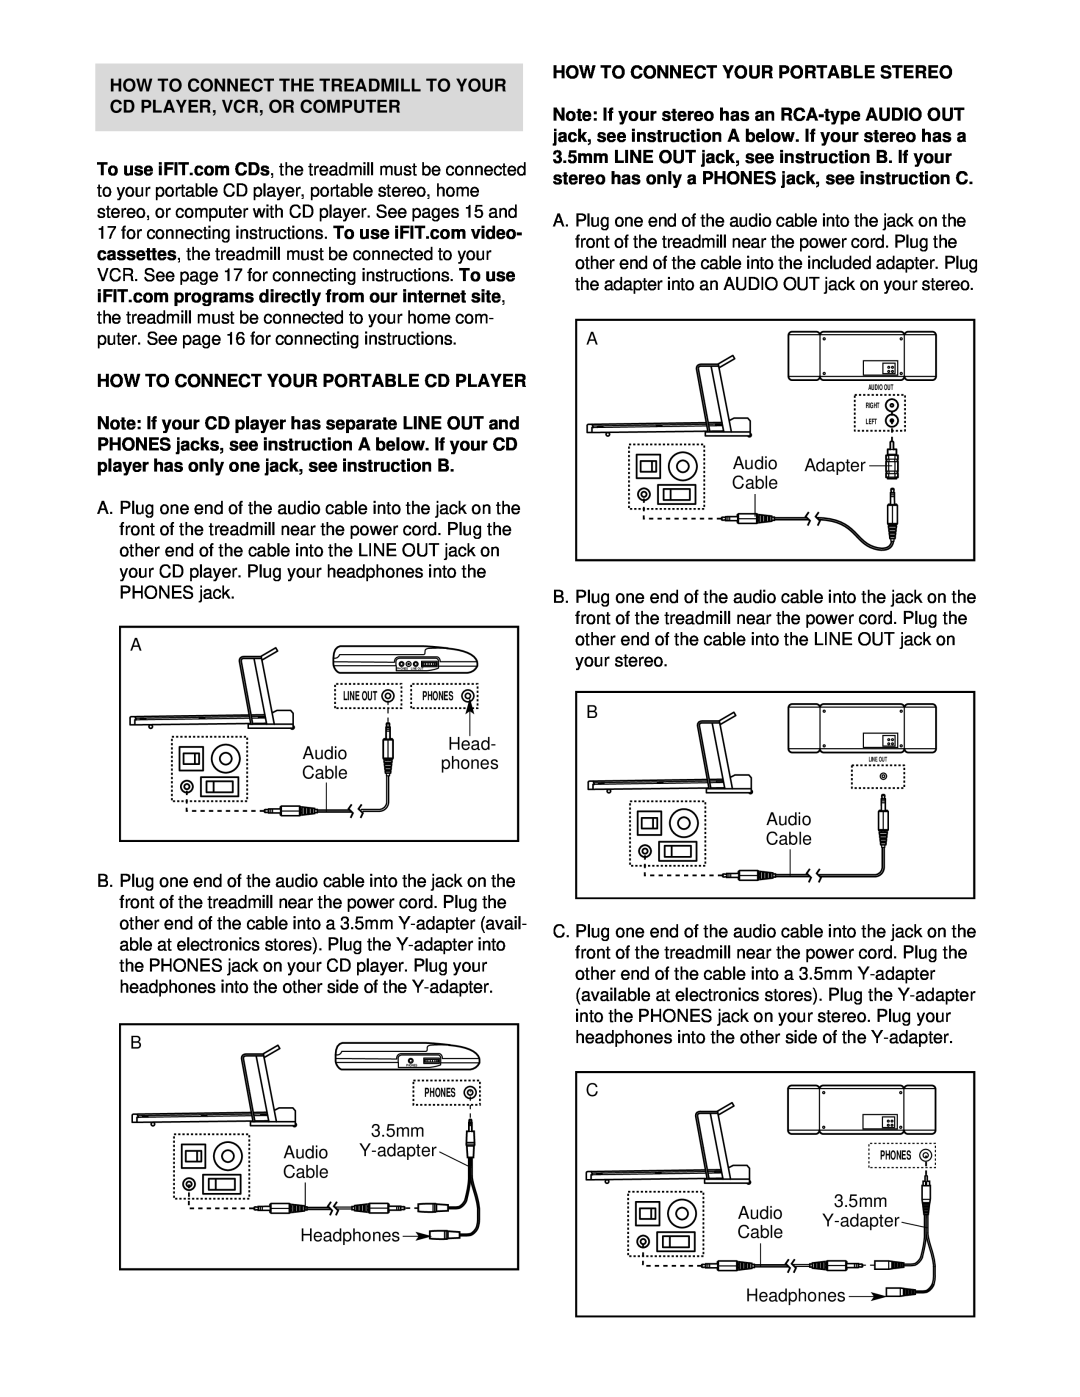 ProForm PFTL69211 How To Connect The Treadmill To Your Cd Player, Vcr, Or Computer, How To Connect Your Portable Cd Player 